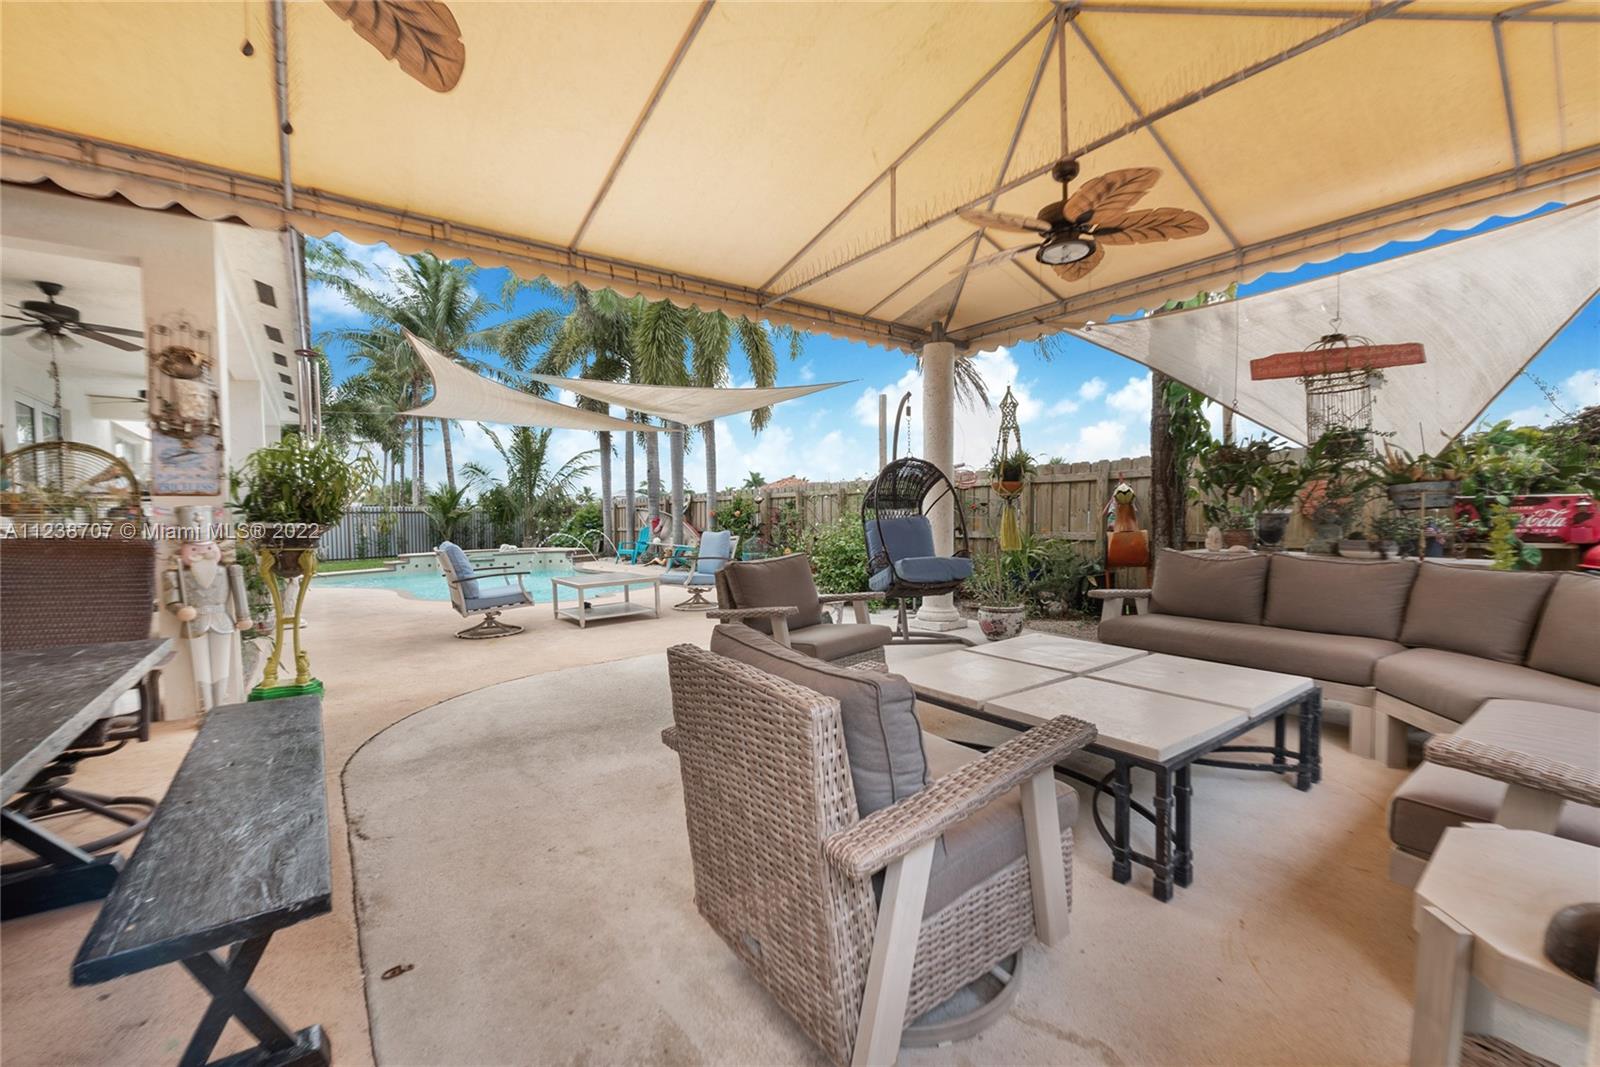 large covered patio